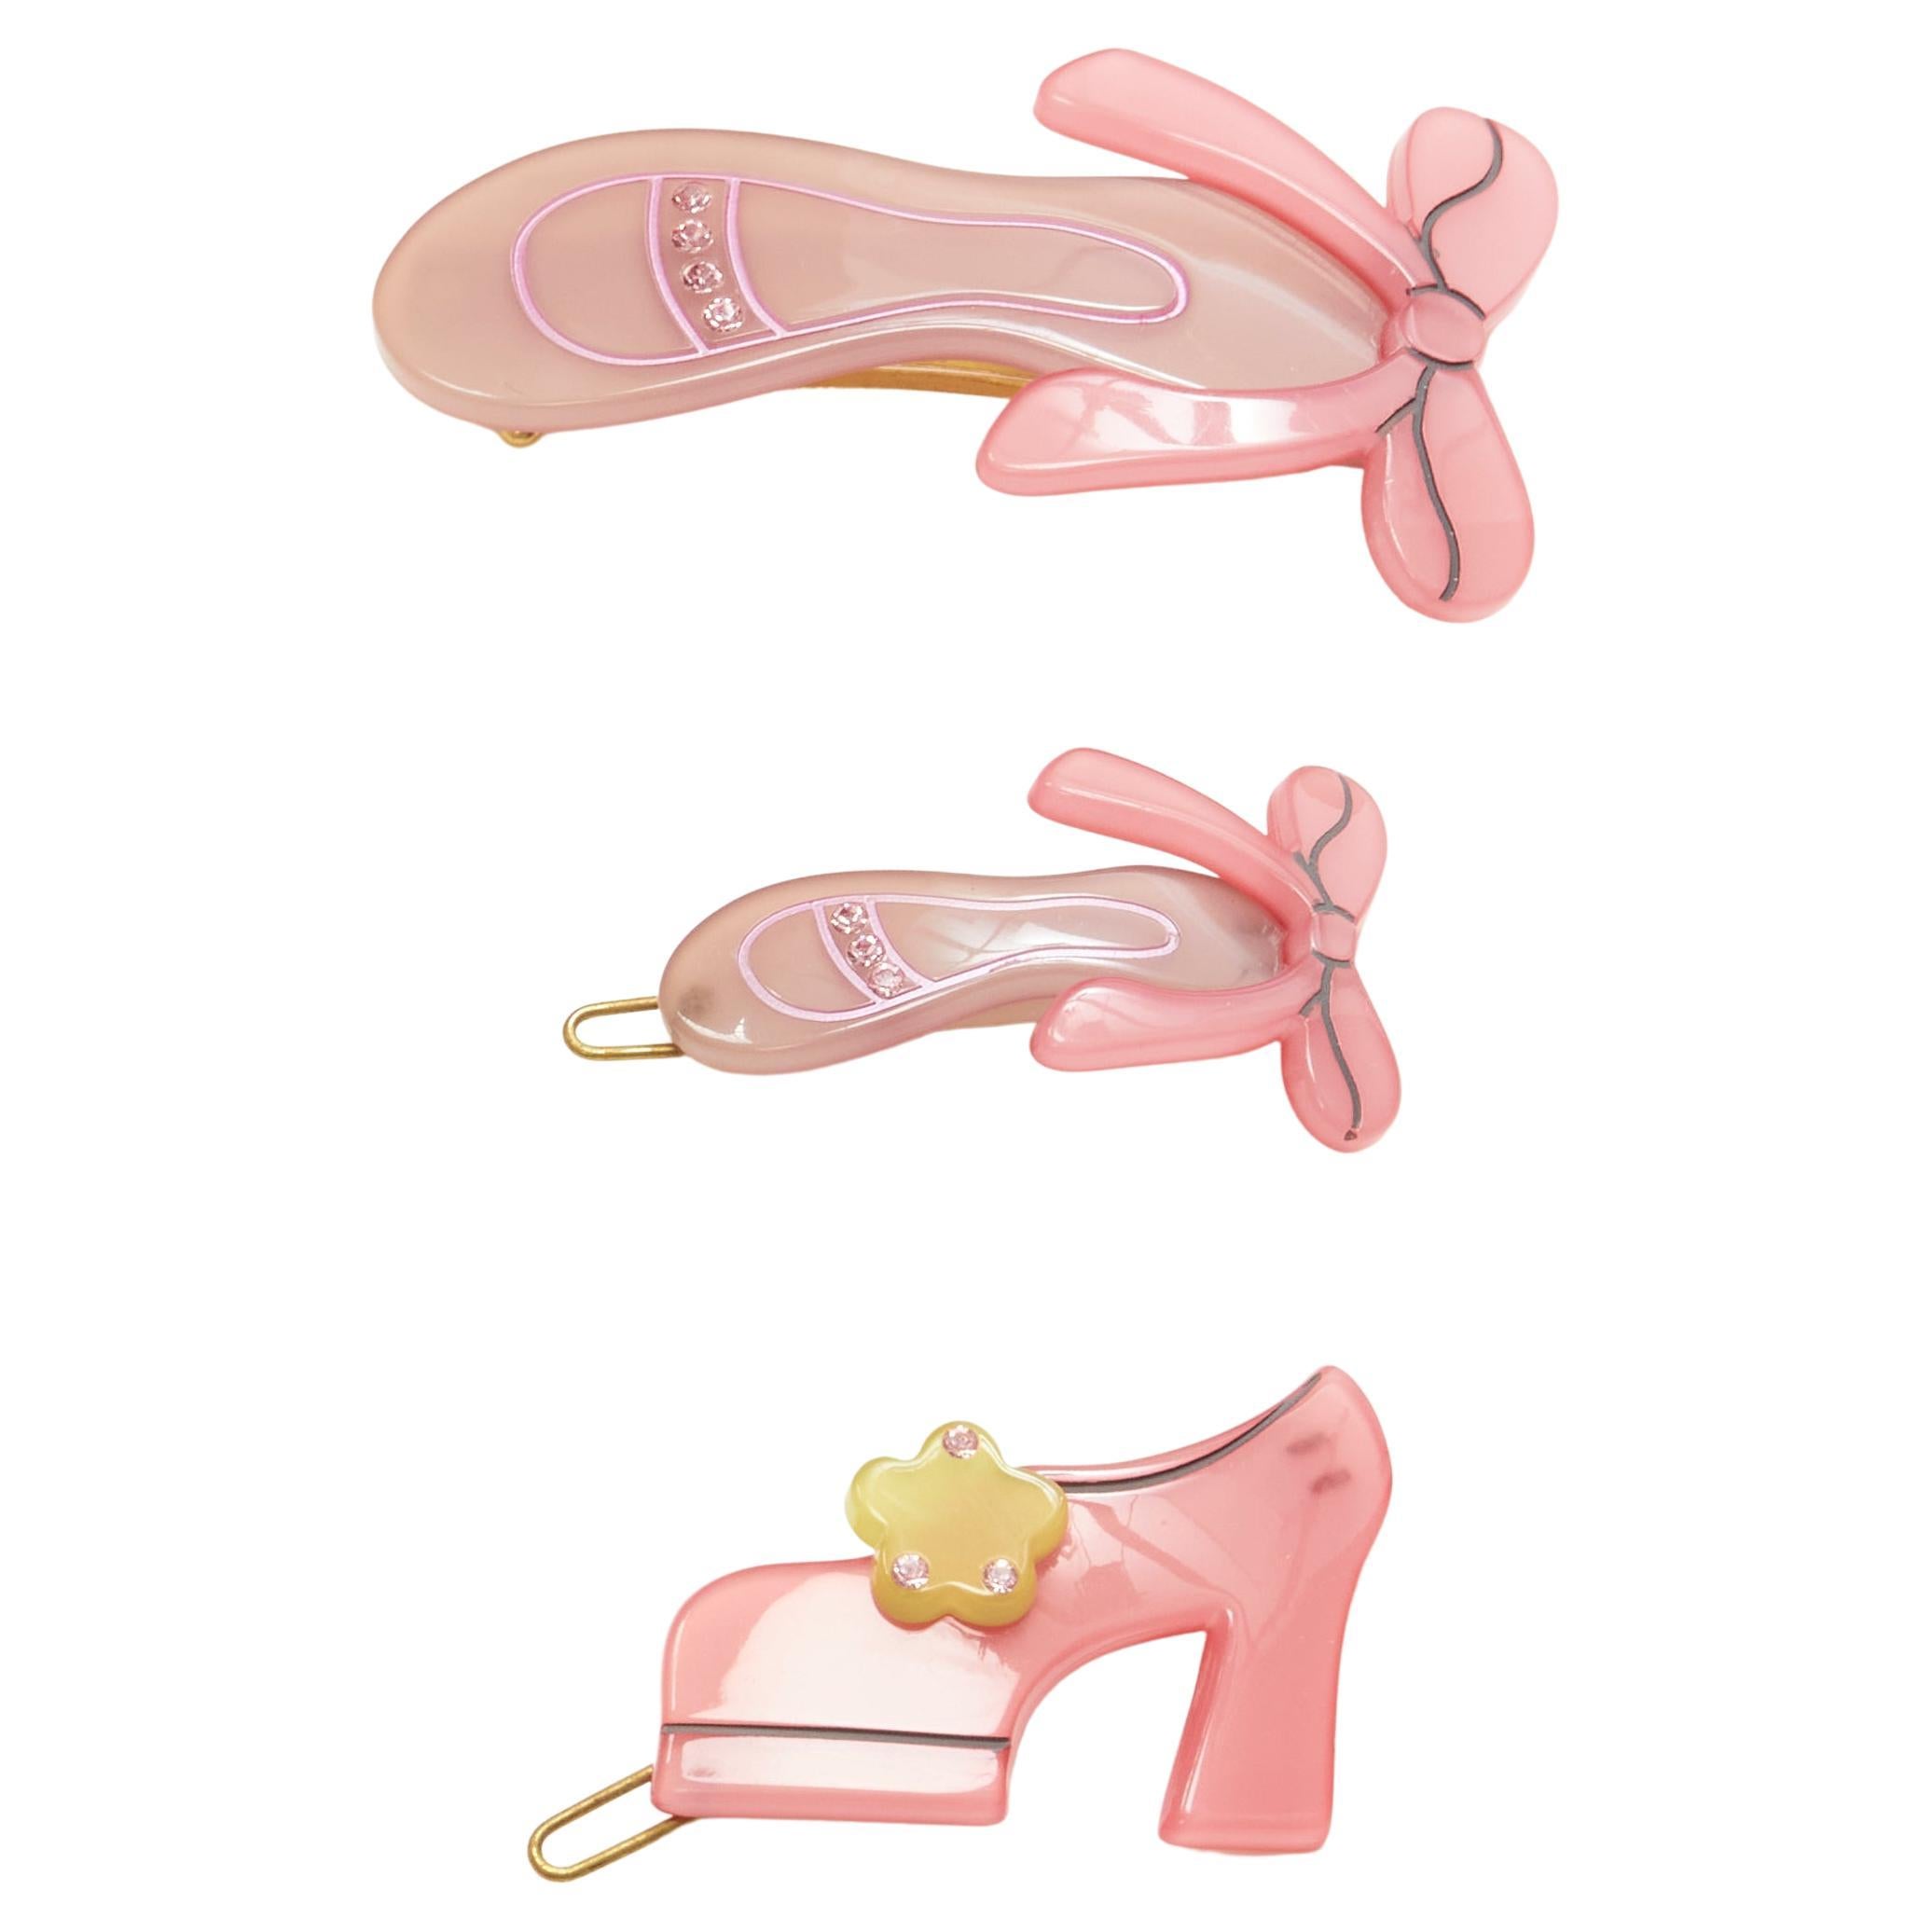 CHIC & MODE Alexandre Zouari LOT OF 3 pink ballerina shoes hair clip For Sale